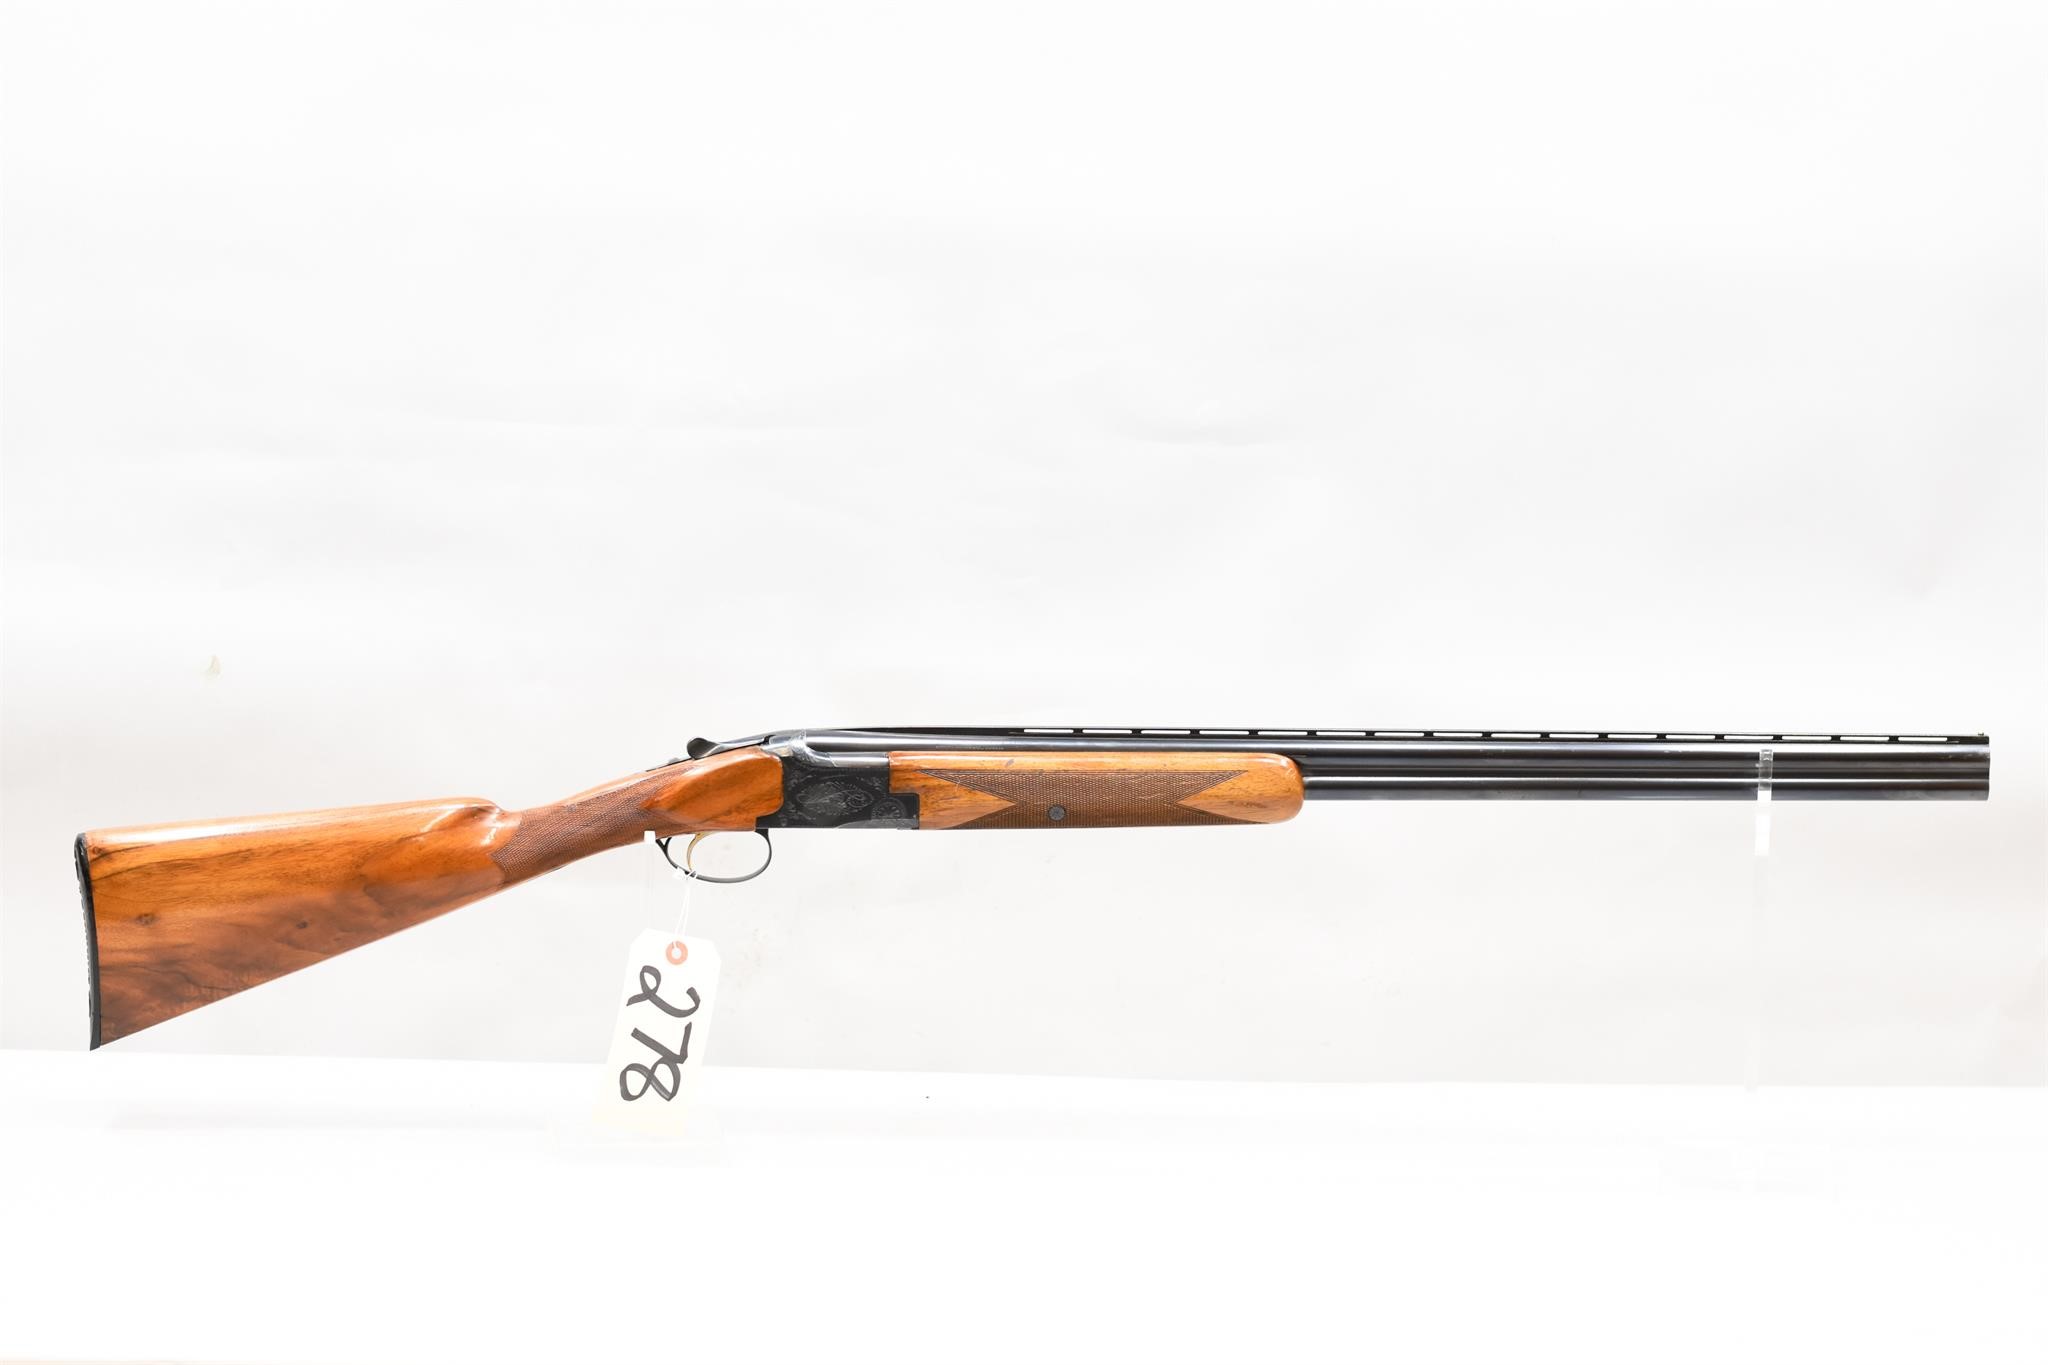 7/17/2021 Firearms & Sporting Goods Auction